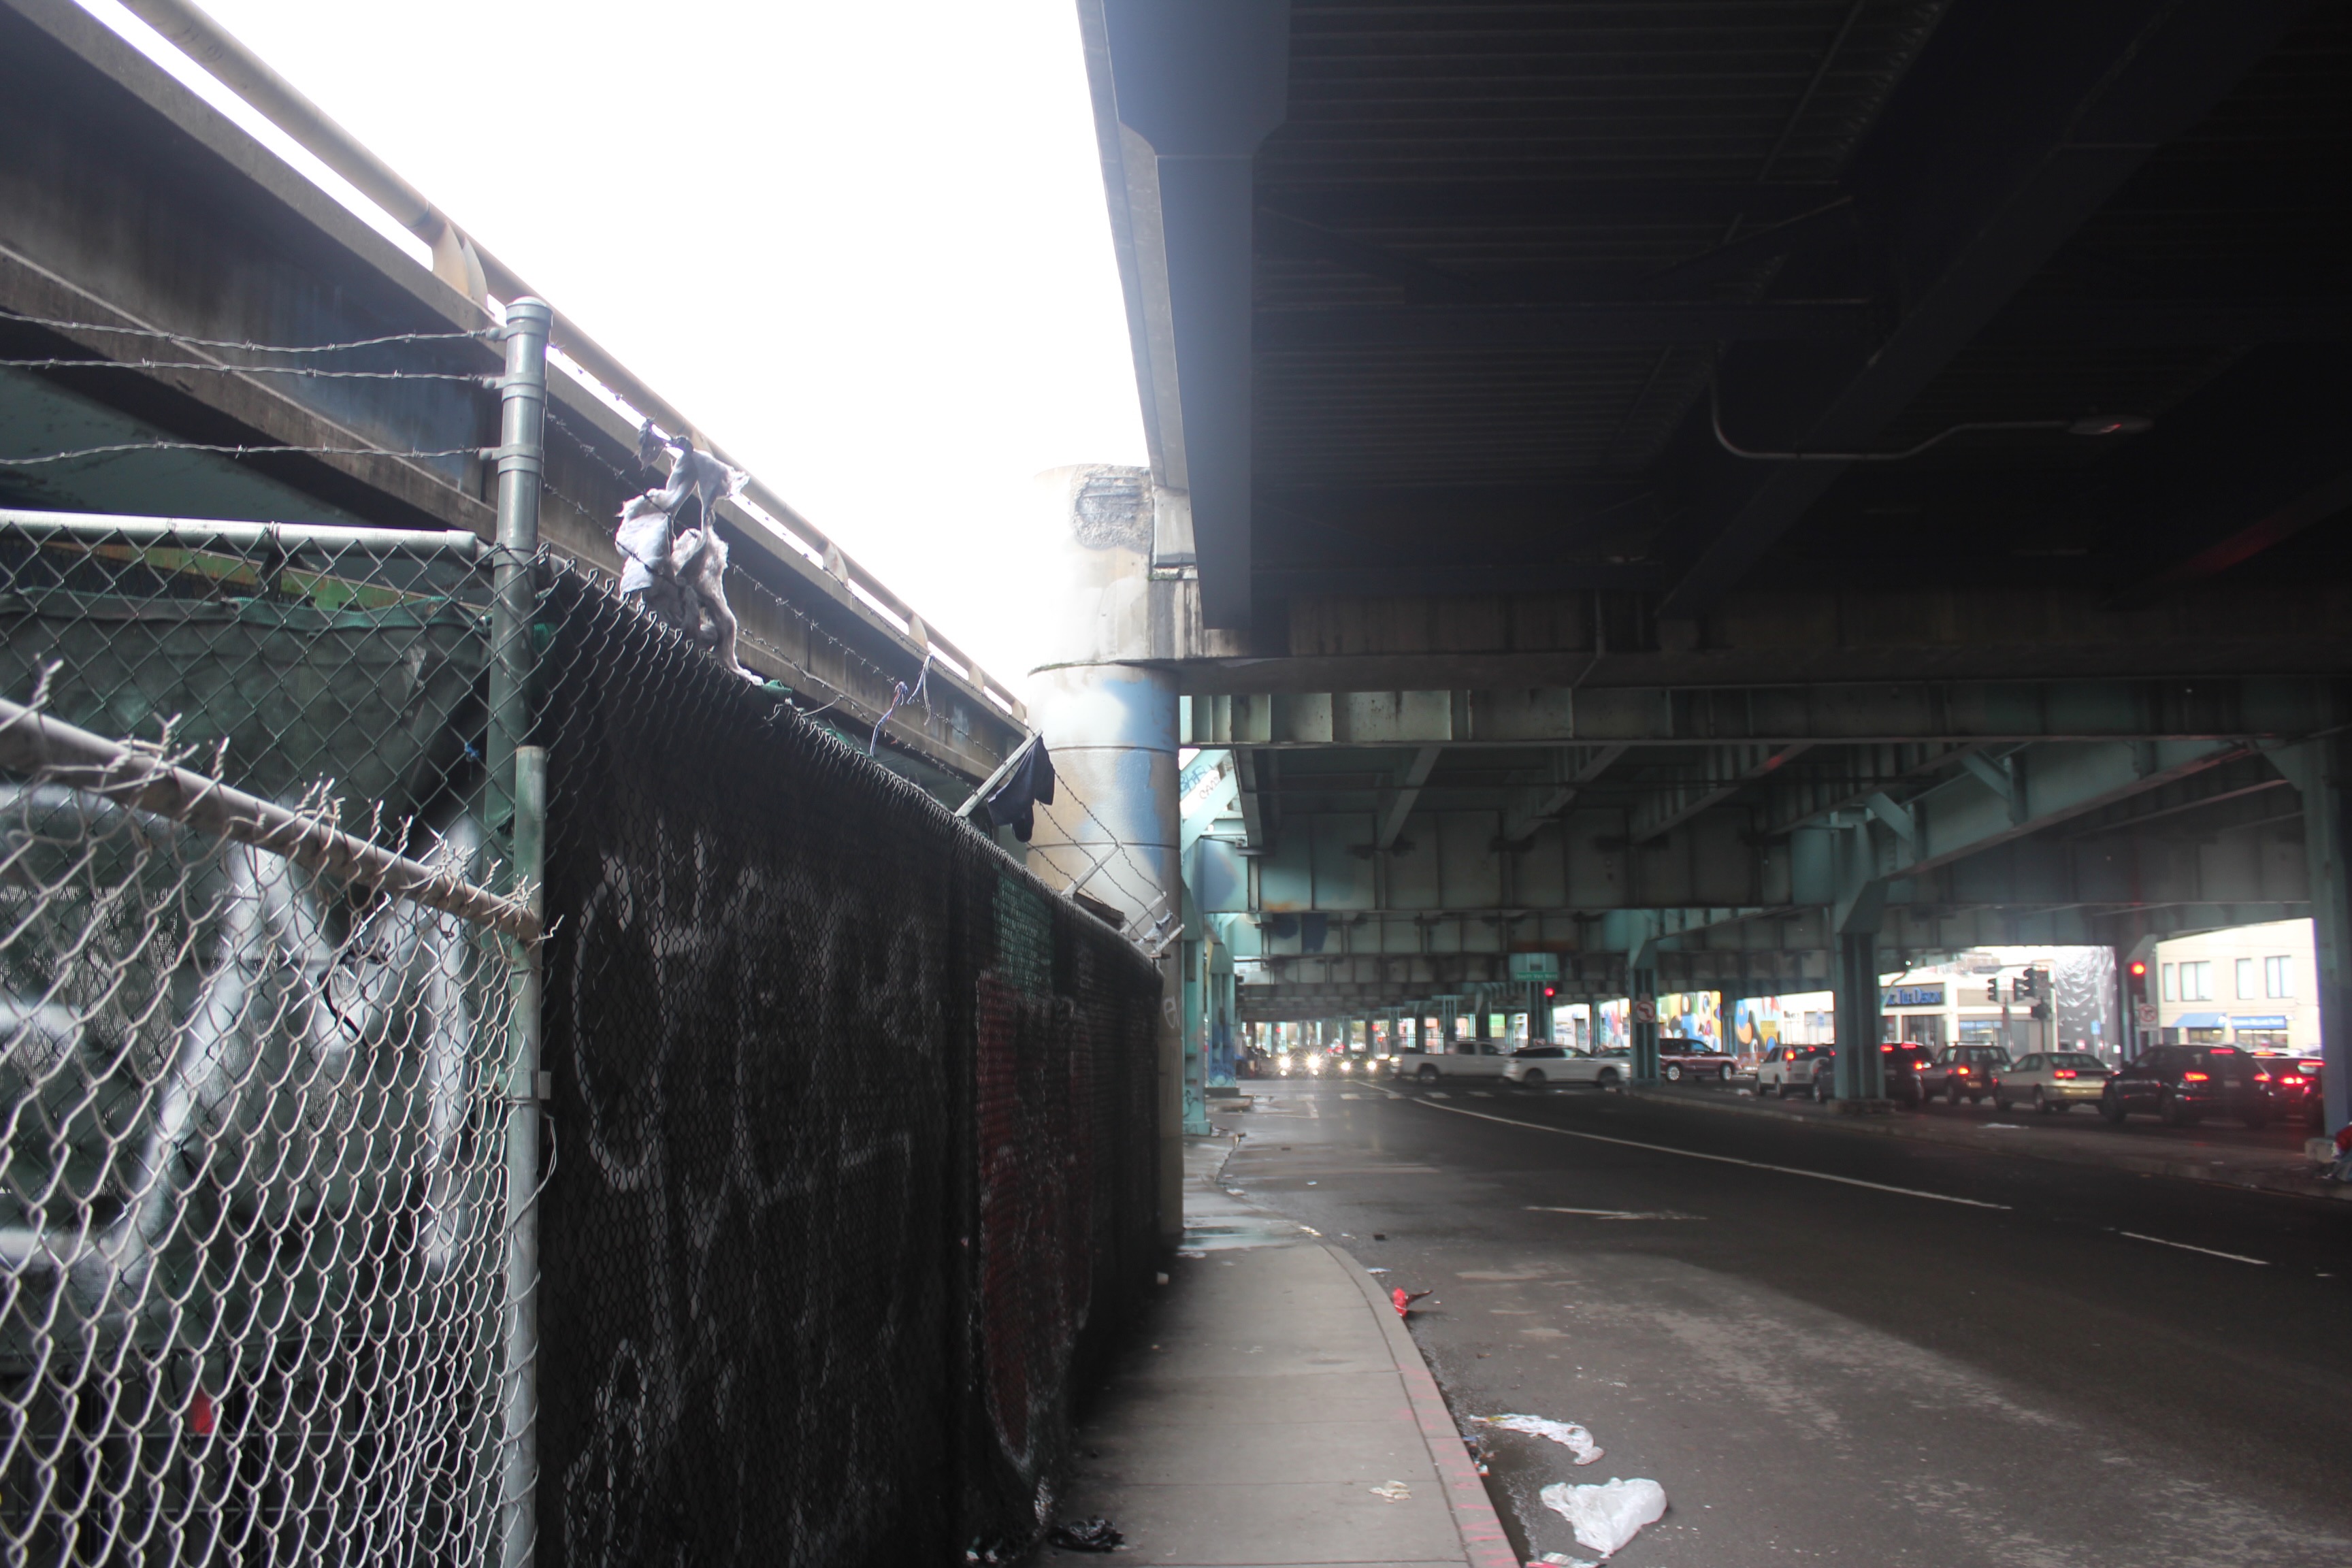 The image shows a dimly lit, slightly wet street beneath an overpass, with a barbed-wire fence to the left, and light traffic in the background.